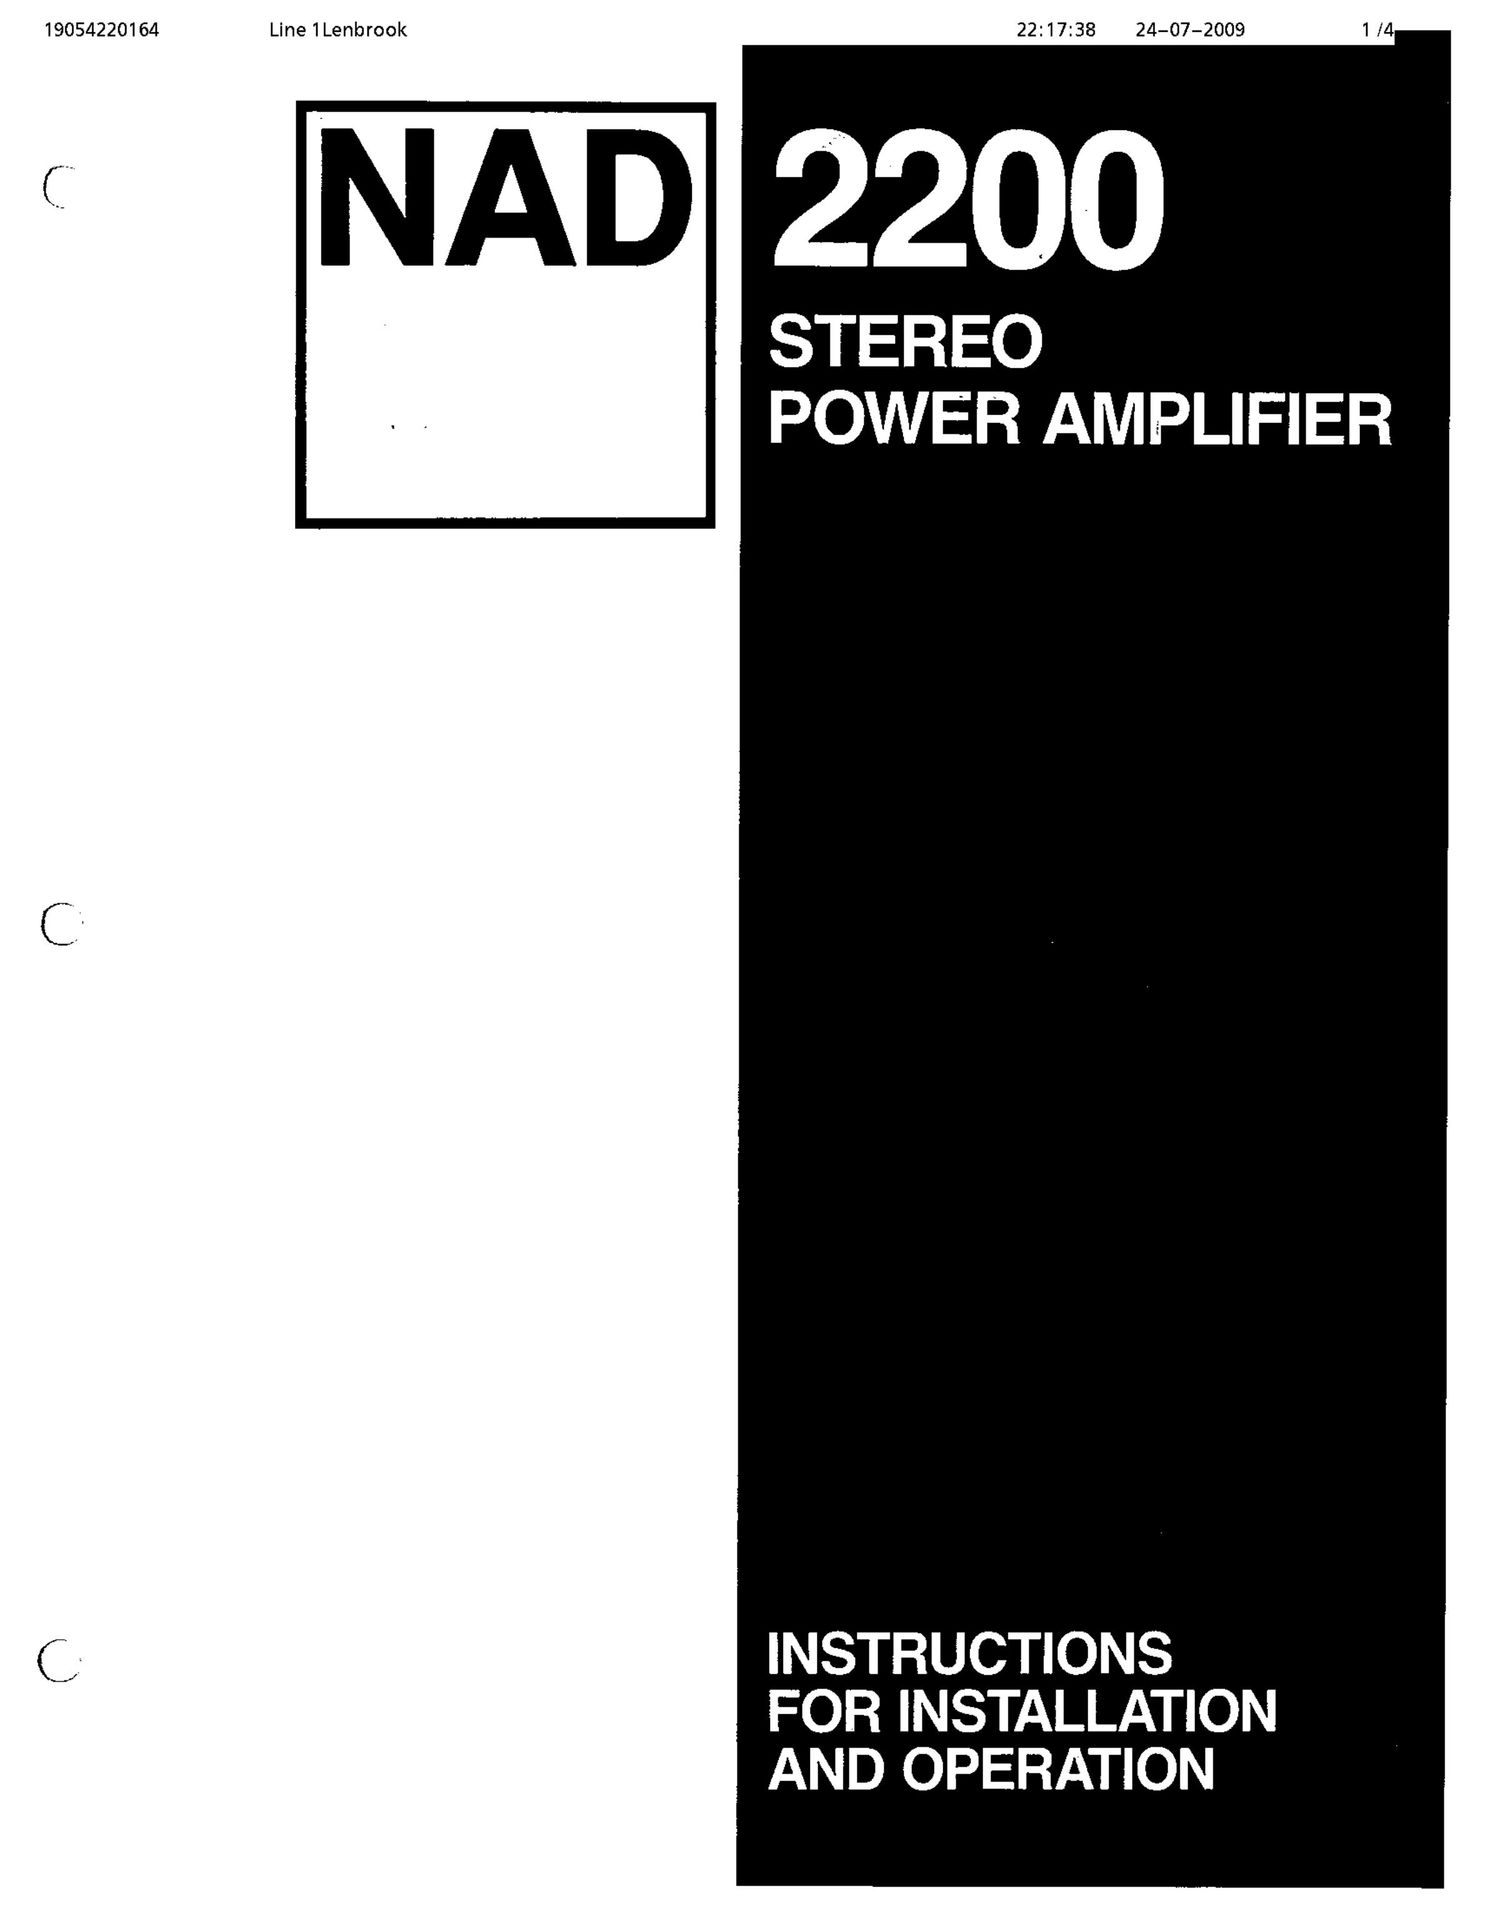 Nad 2200 Owners Manual